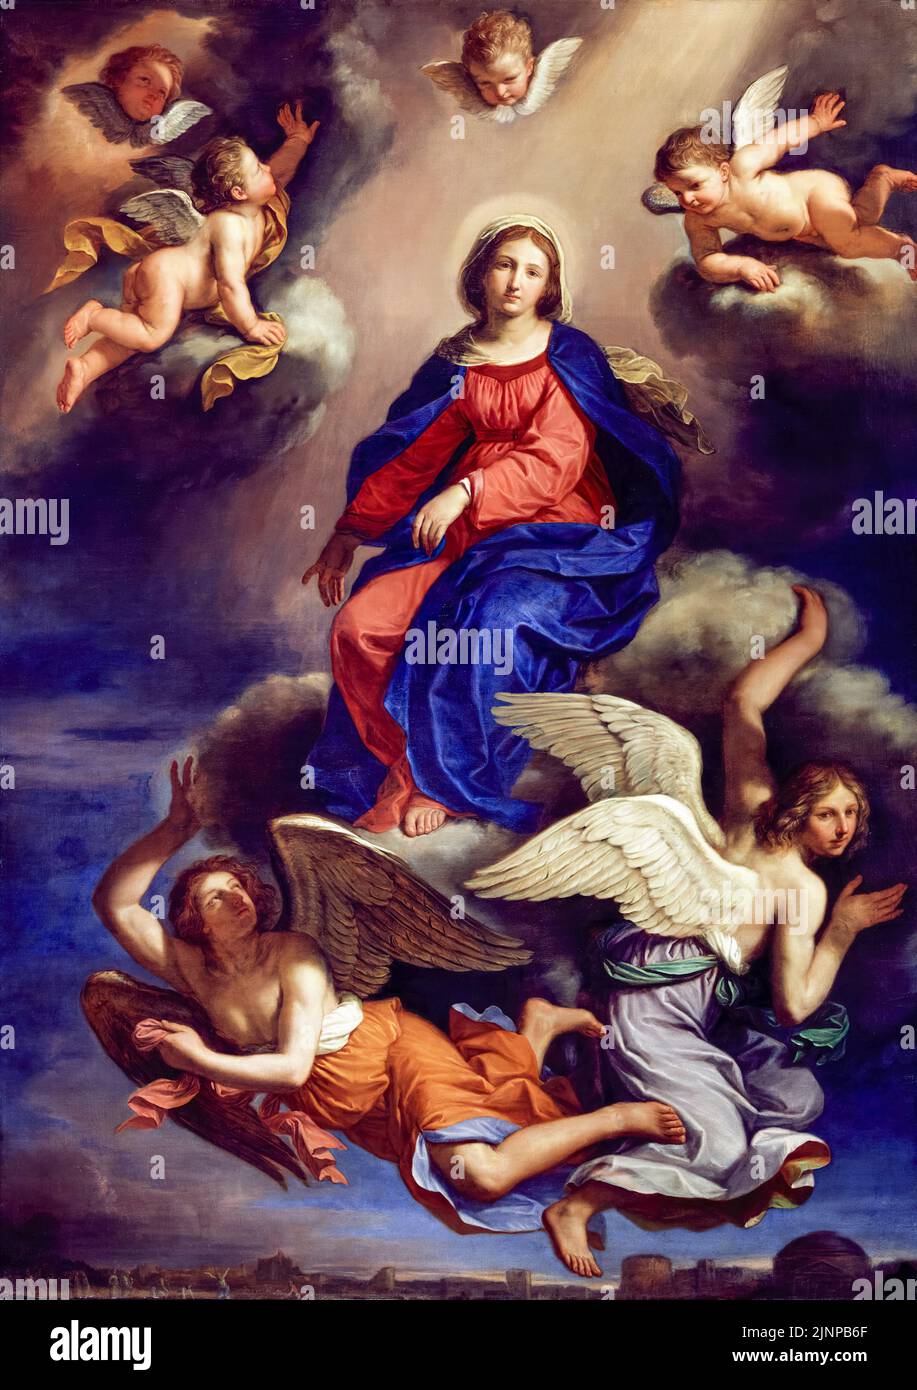 Assumption Of The Virgin, painting in oil on canvas by Giovanni Francesco Barbieri, called Guercino, 1650 Stock Photo